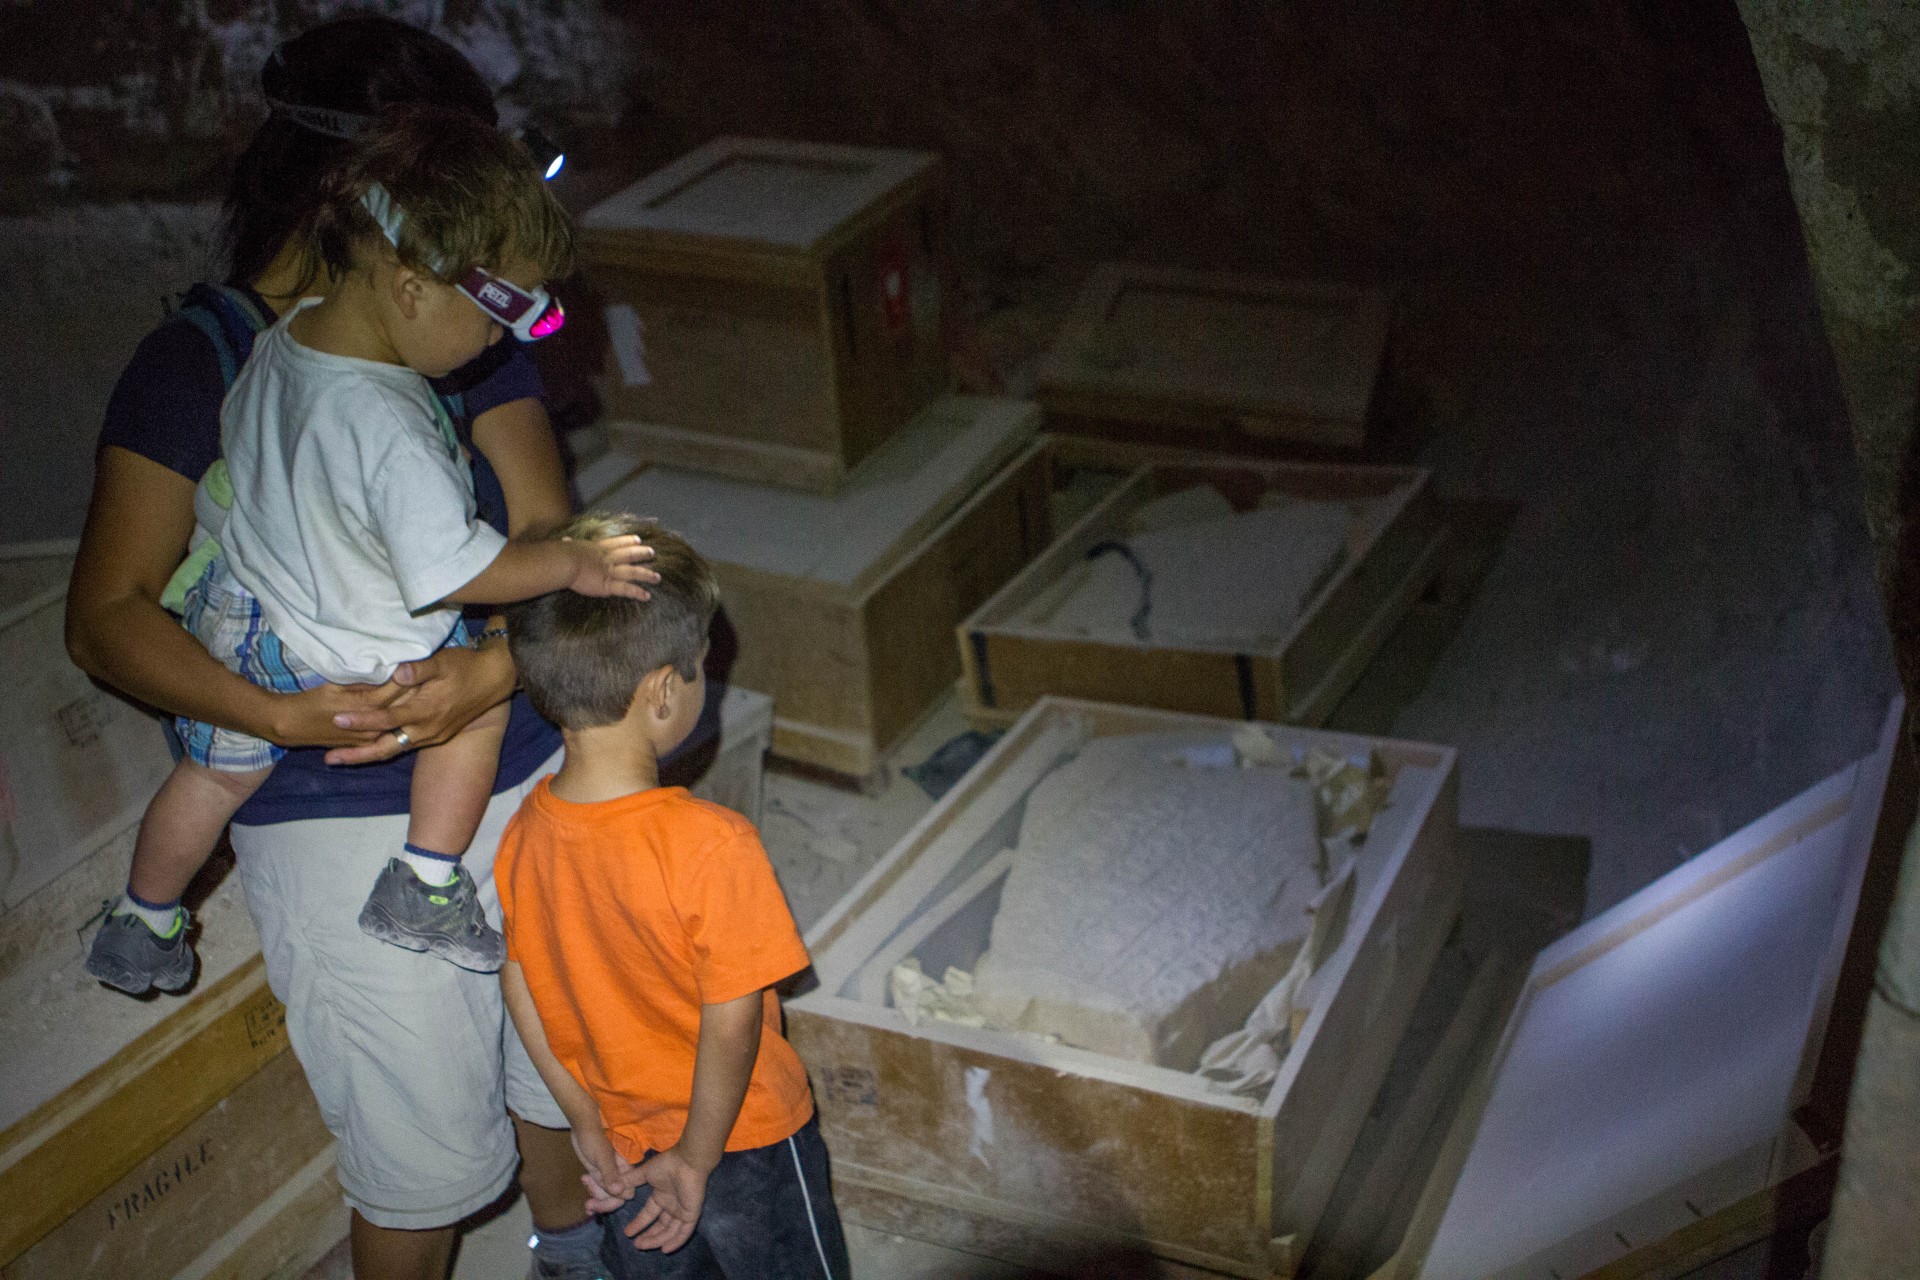 Mother and young children examine ancient artifacts in an ancient castle